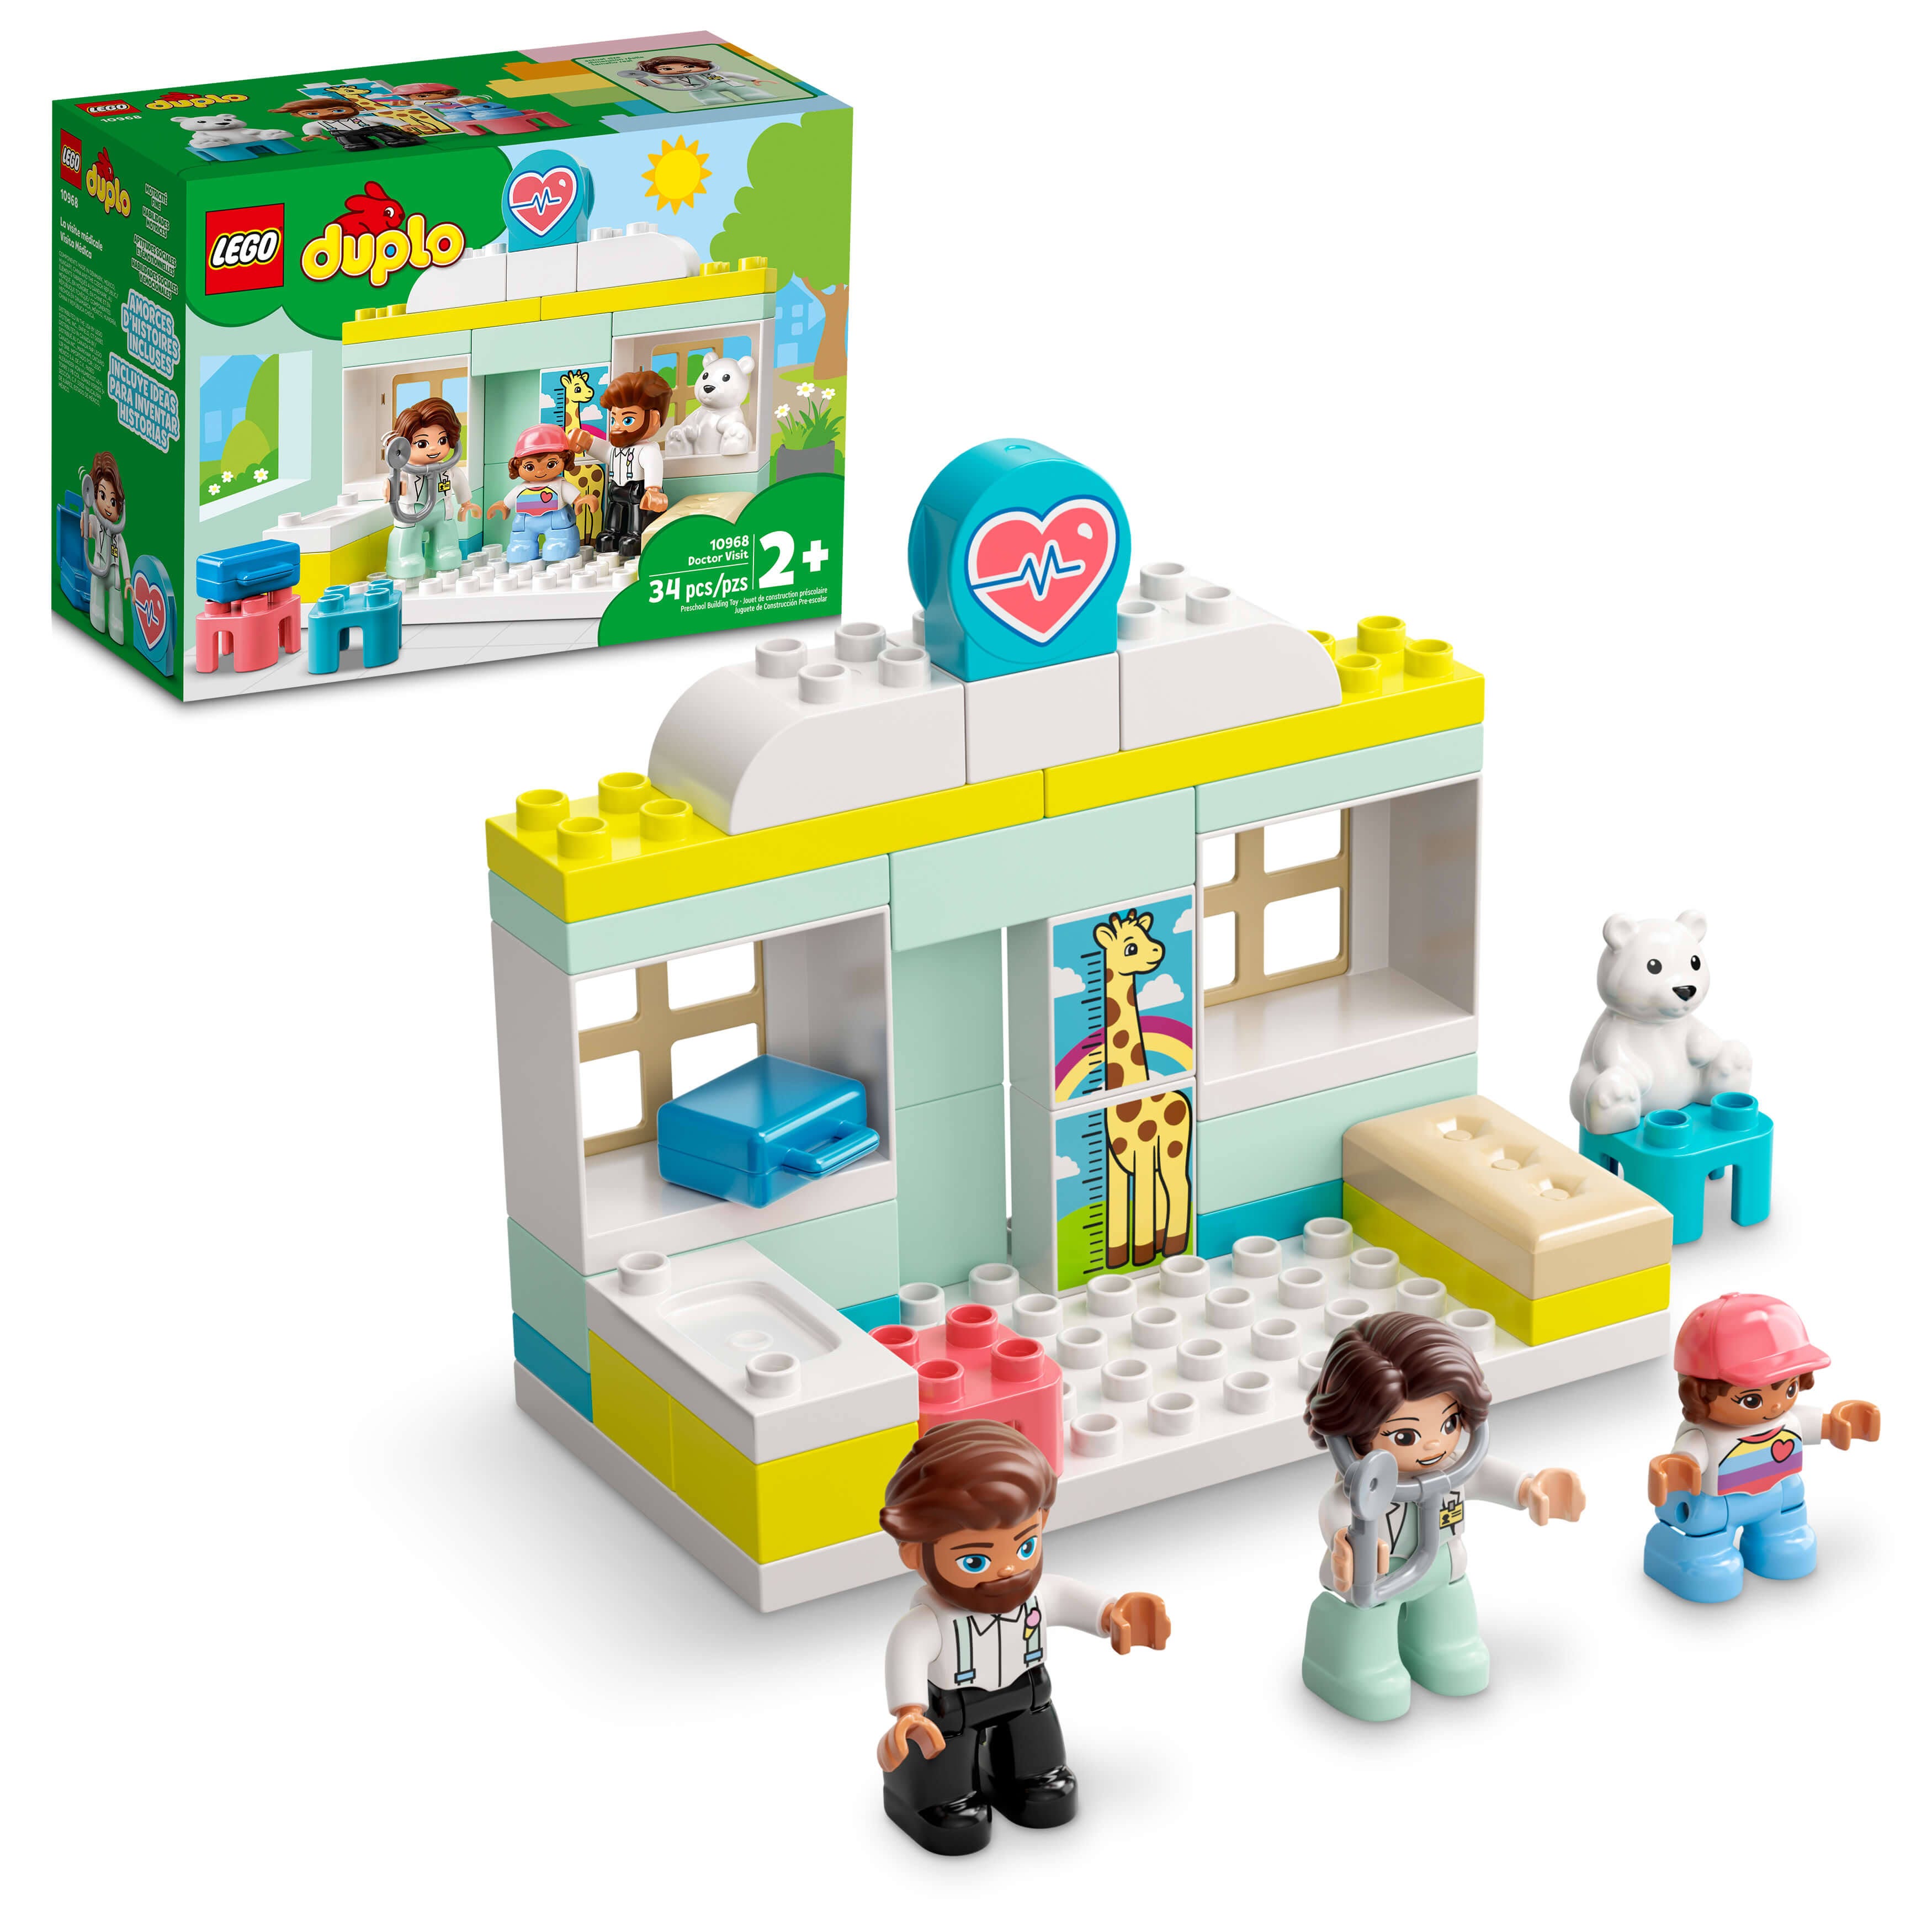 LEGO Duplo Doctor Visit Playset for Early Learning | Image